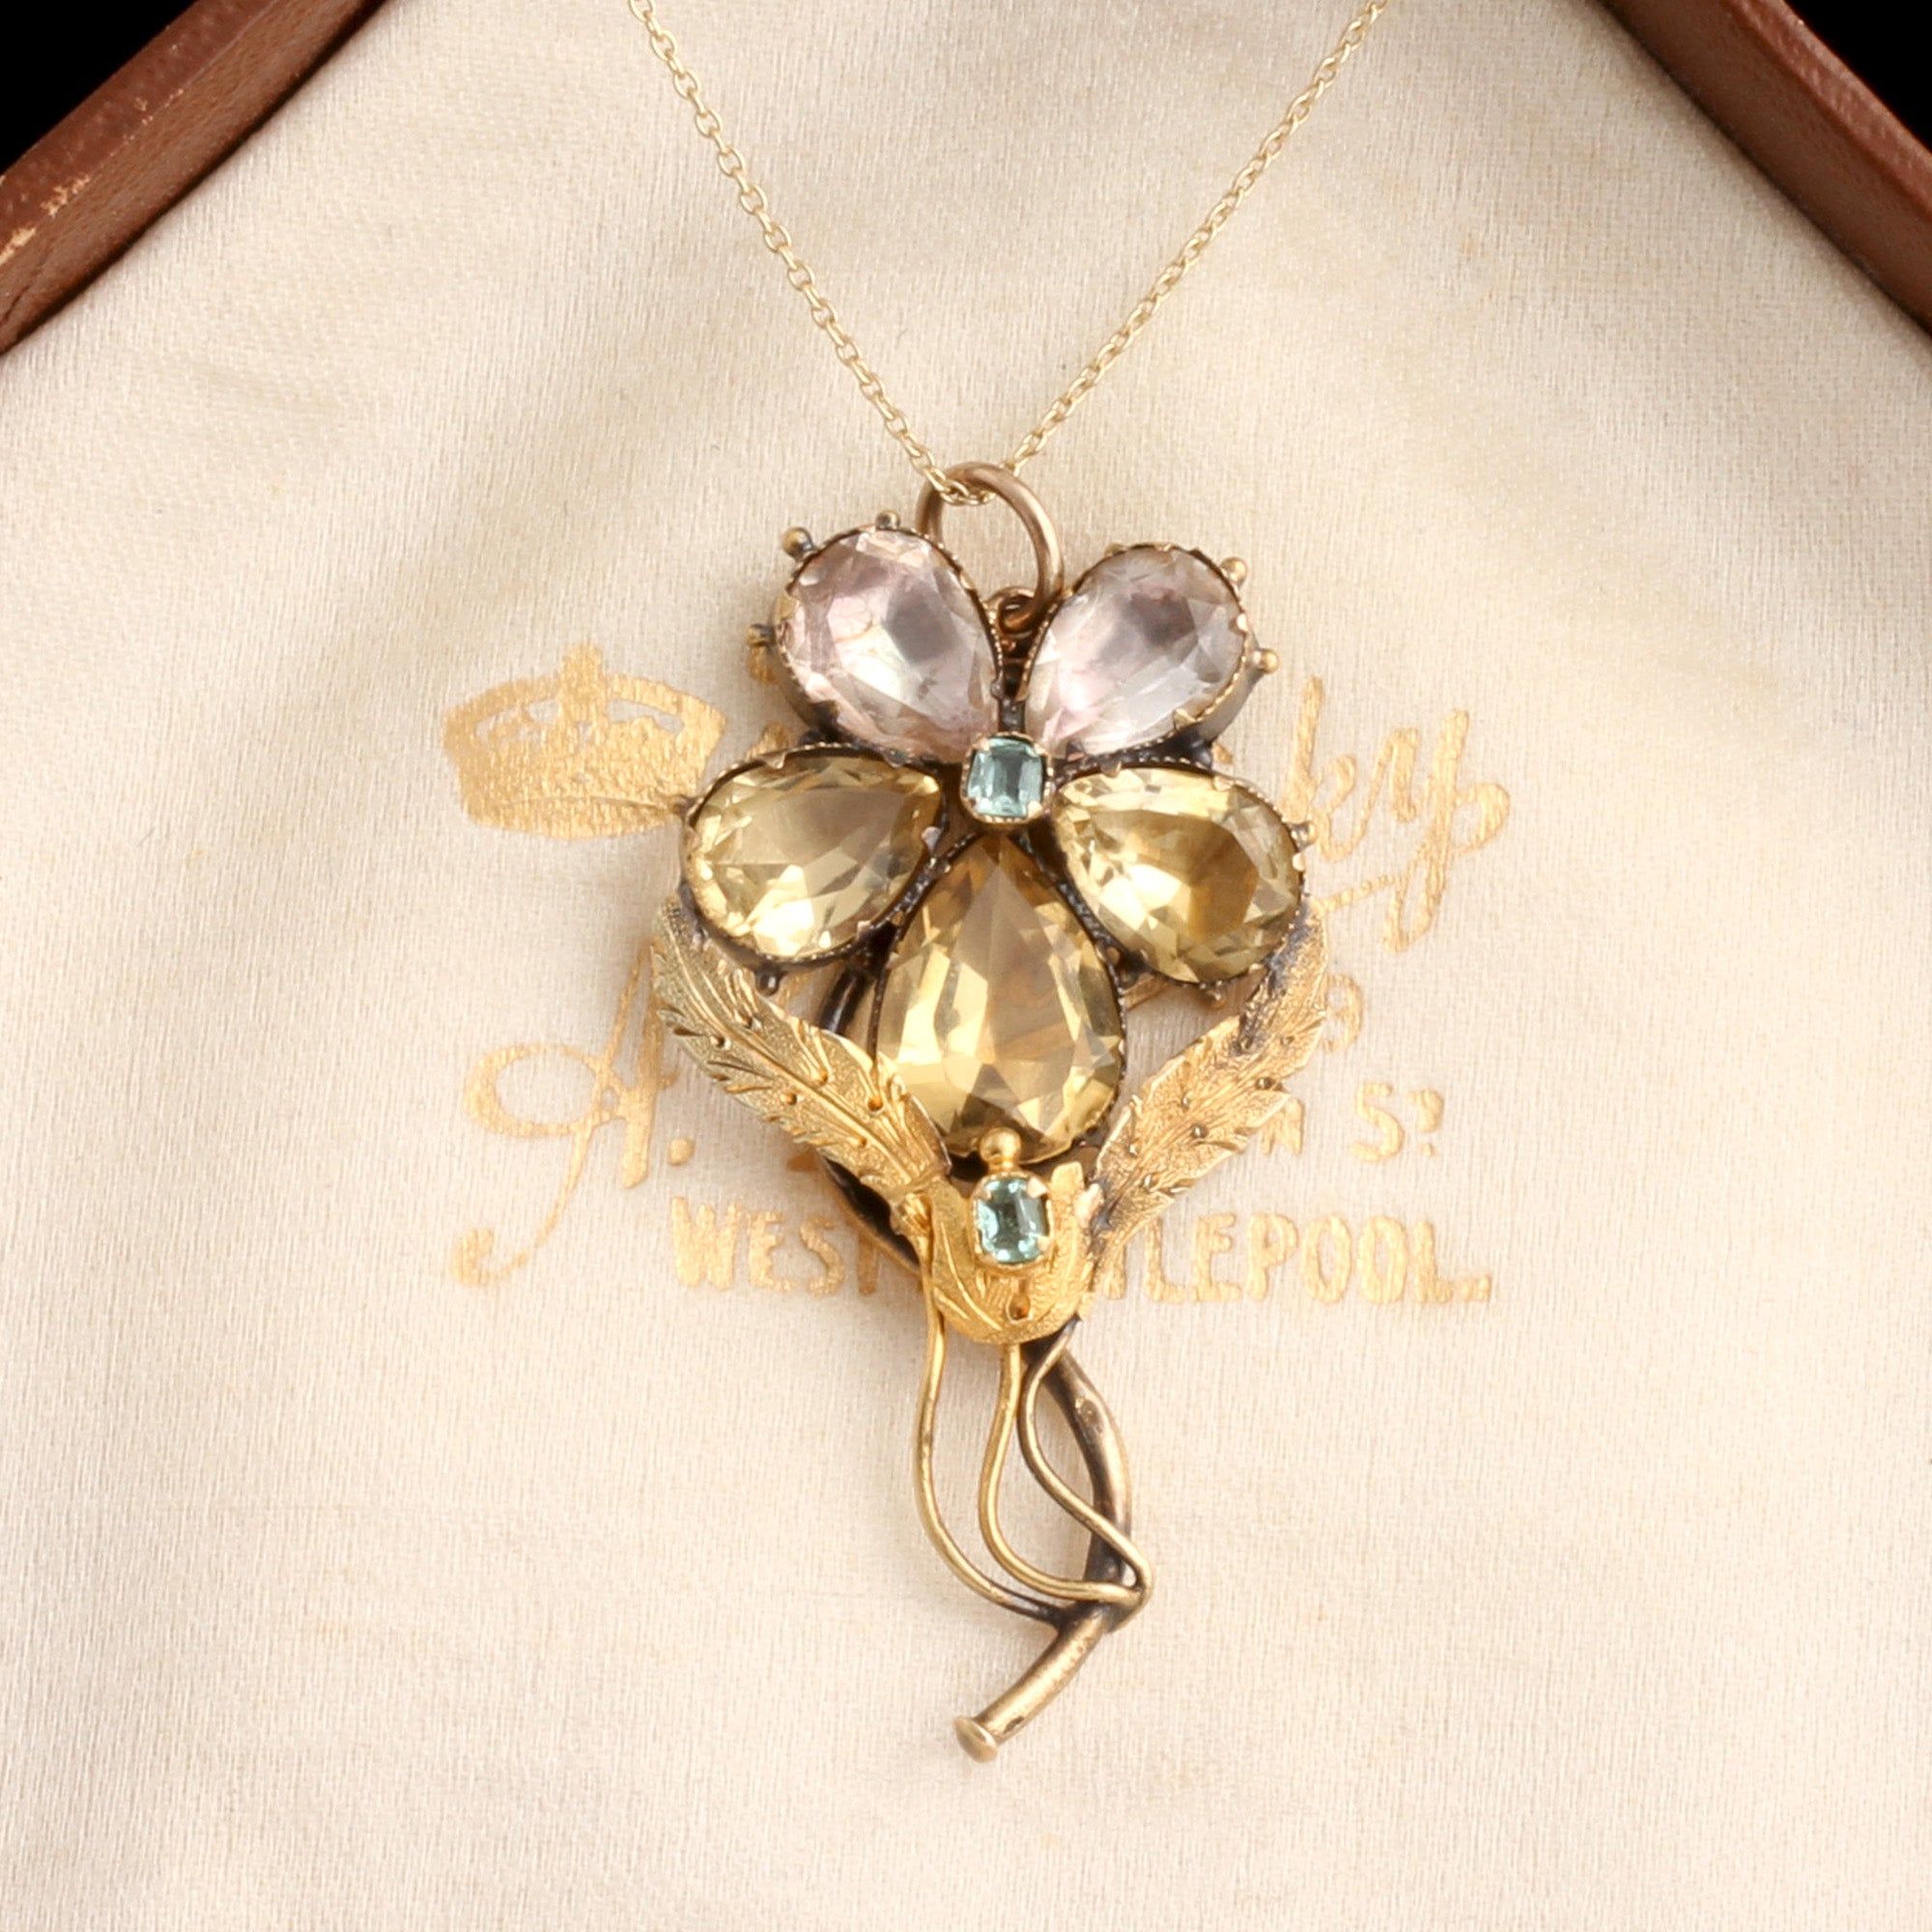 Detail of Early Victorian Gemstone Pansy Necklace